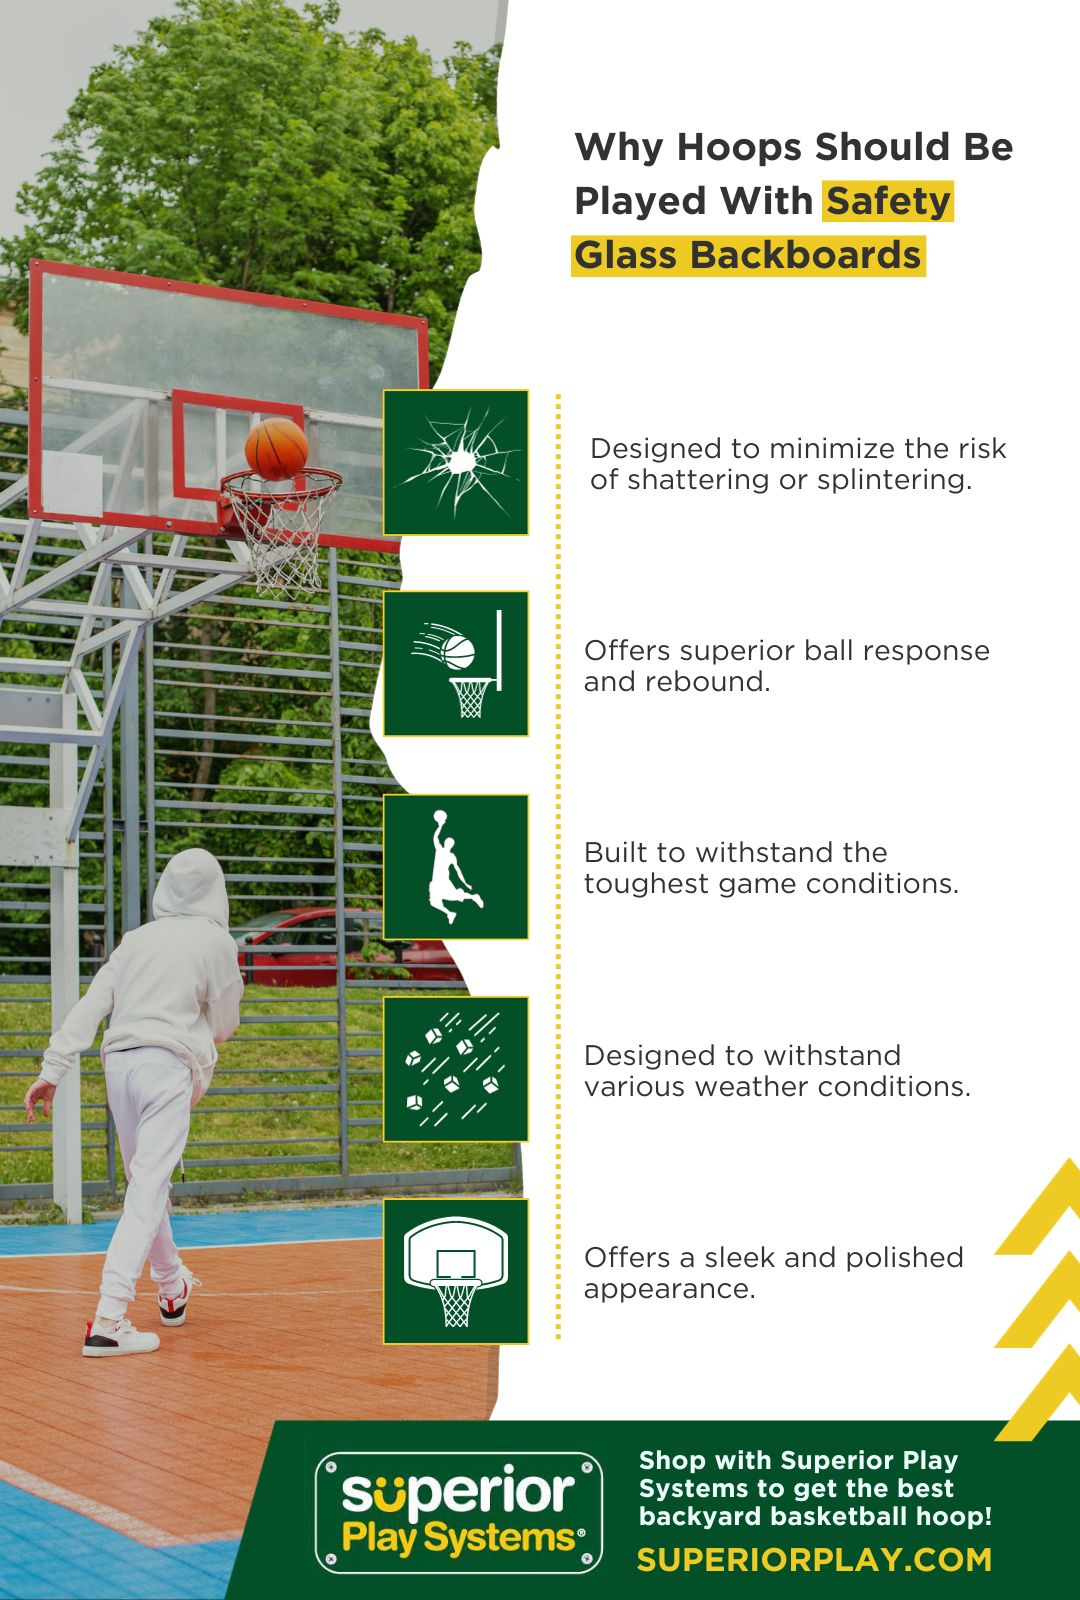 Why Hoops Should Be Played With Safety Glass Backboards